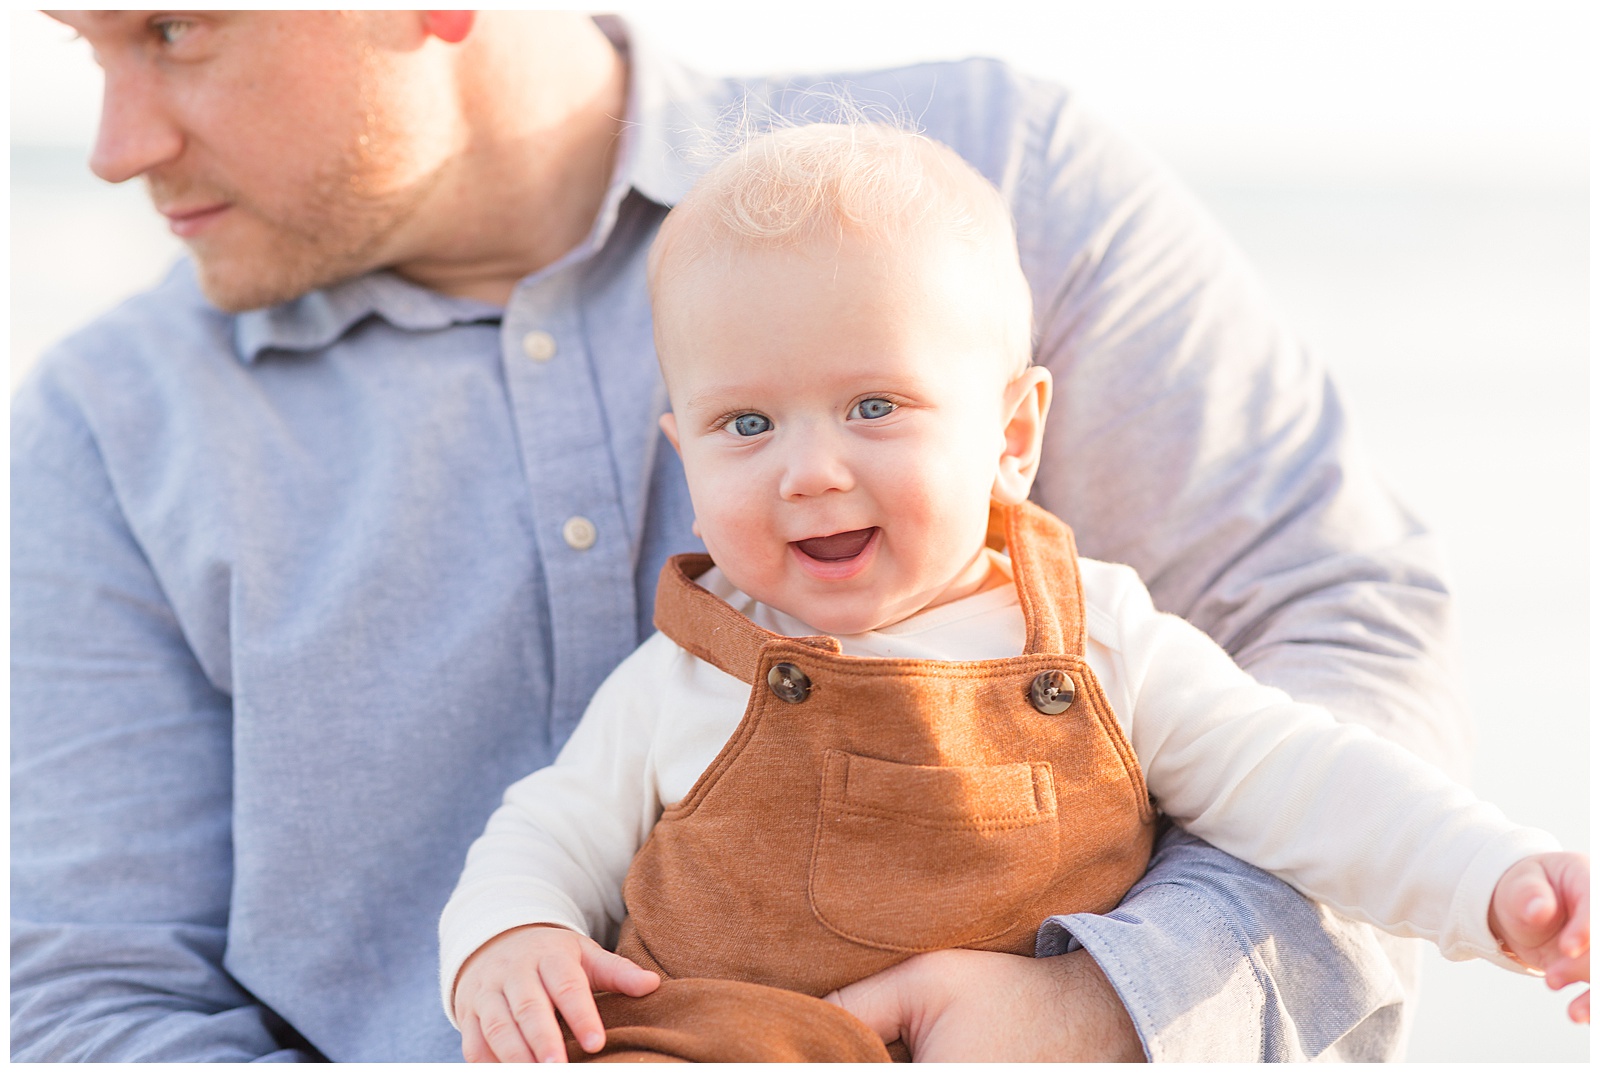 Blue-eyed, blond hair little boy smiles at camera in his brown overalls as his Dad holds him in his arms.